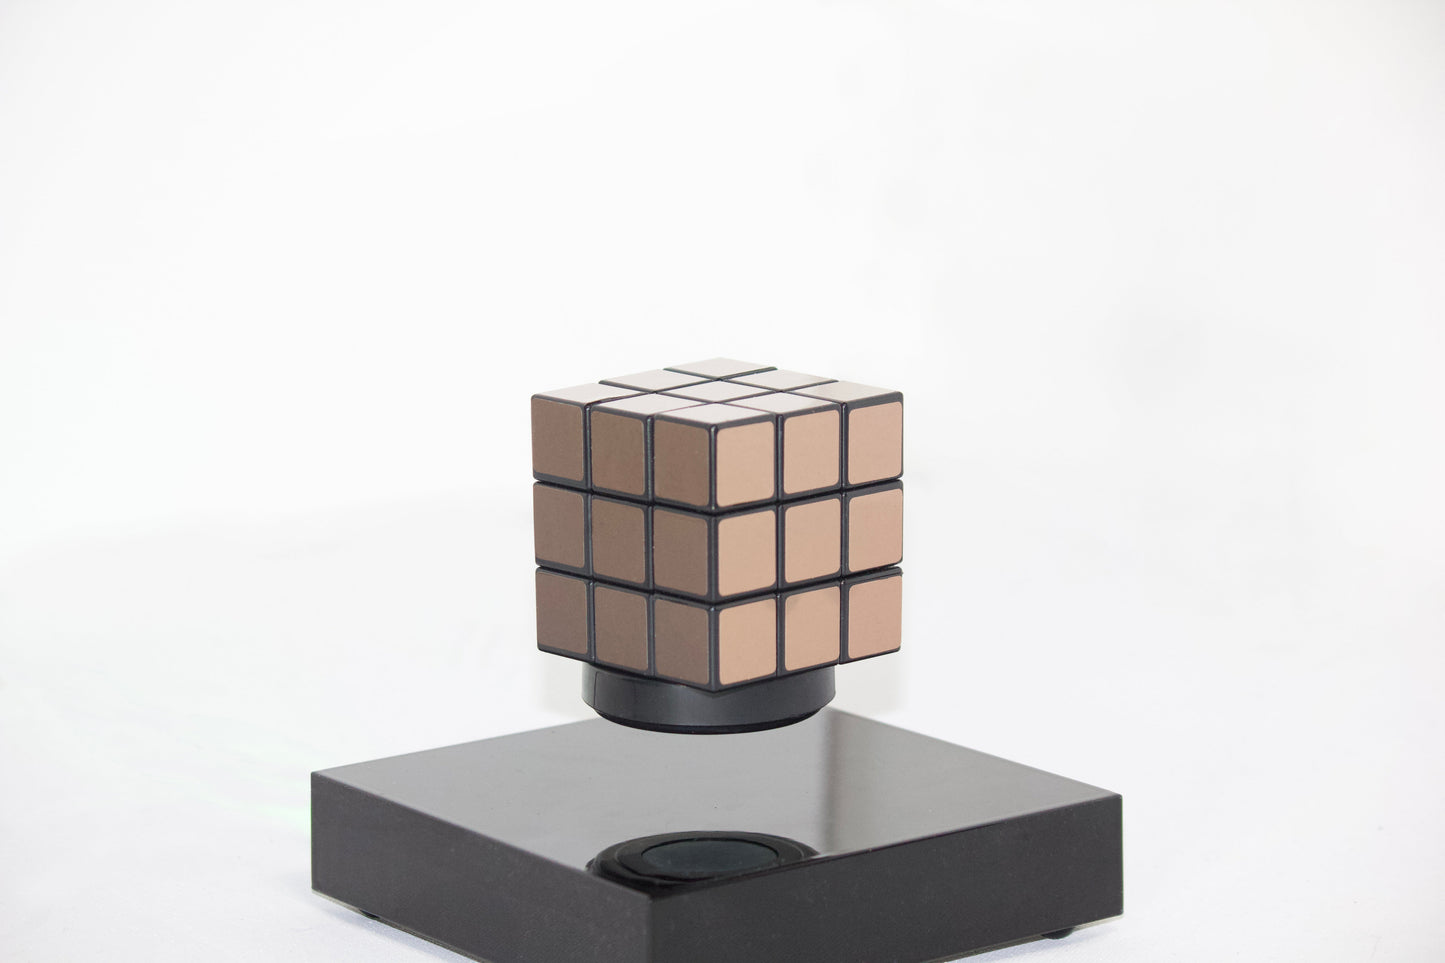 The SHADES Puzzle Cube